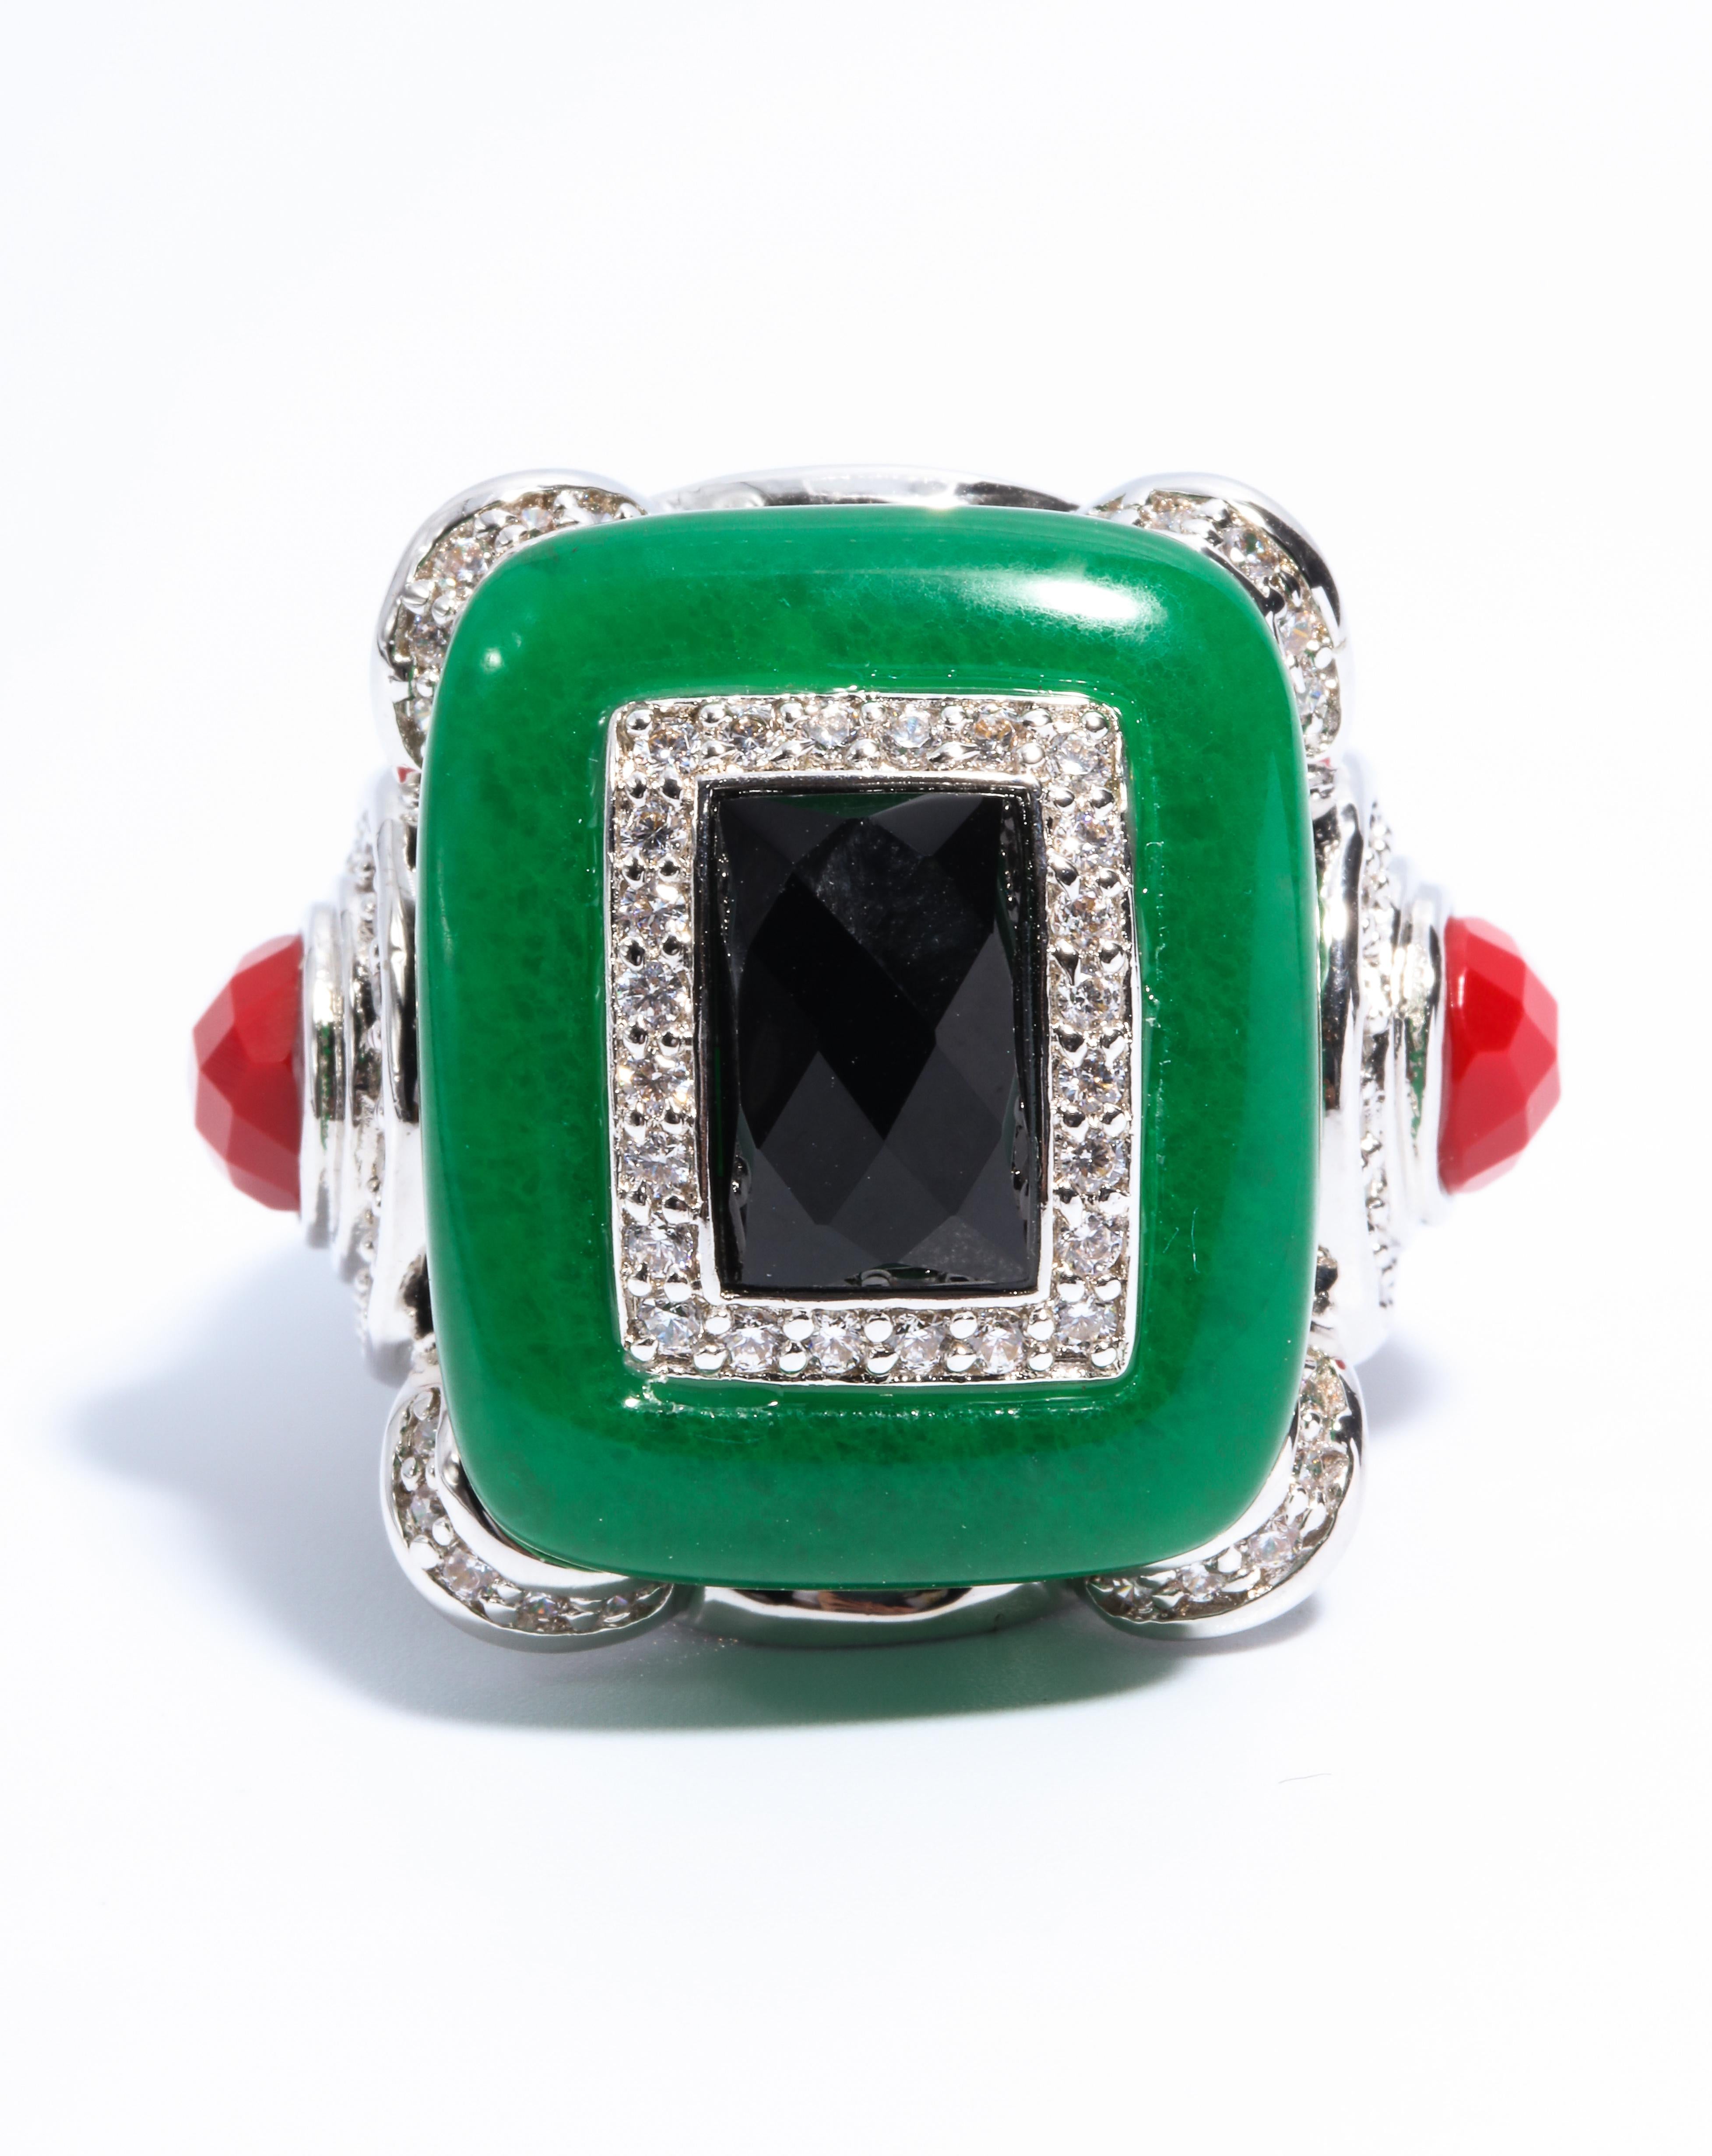  Art Deco Style Palm Beach Large Faux Diamond Jade Onyx Coral Ring.  This is a size 8